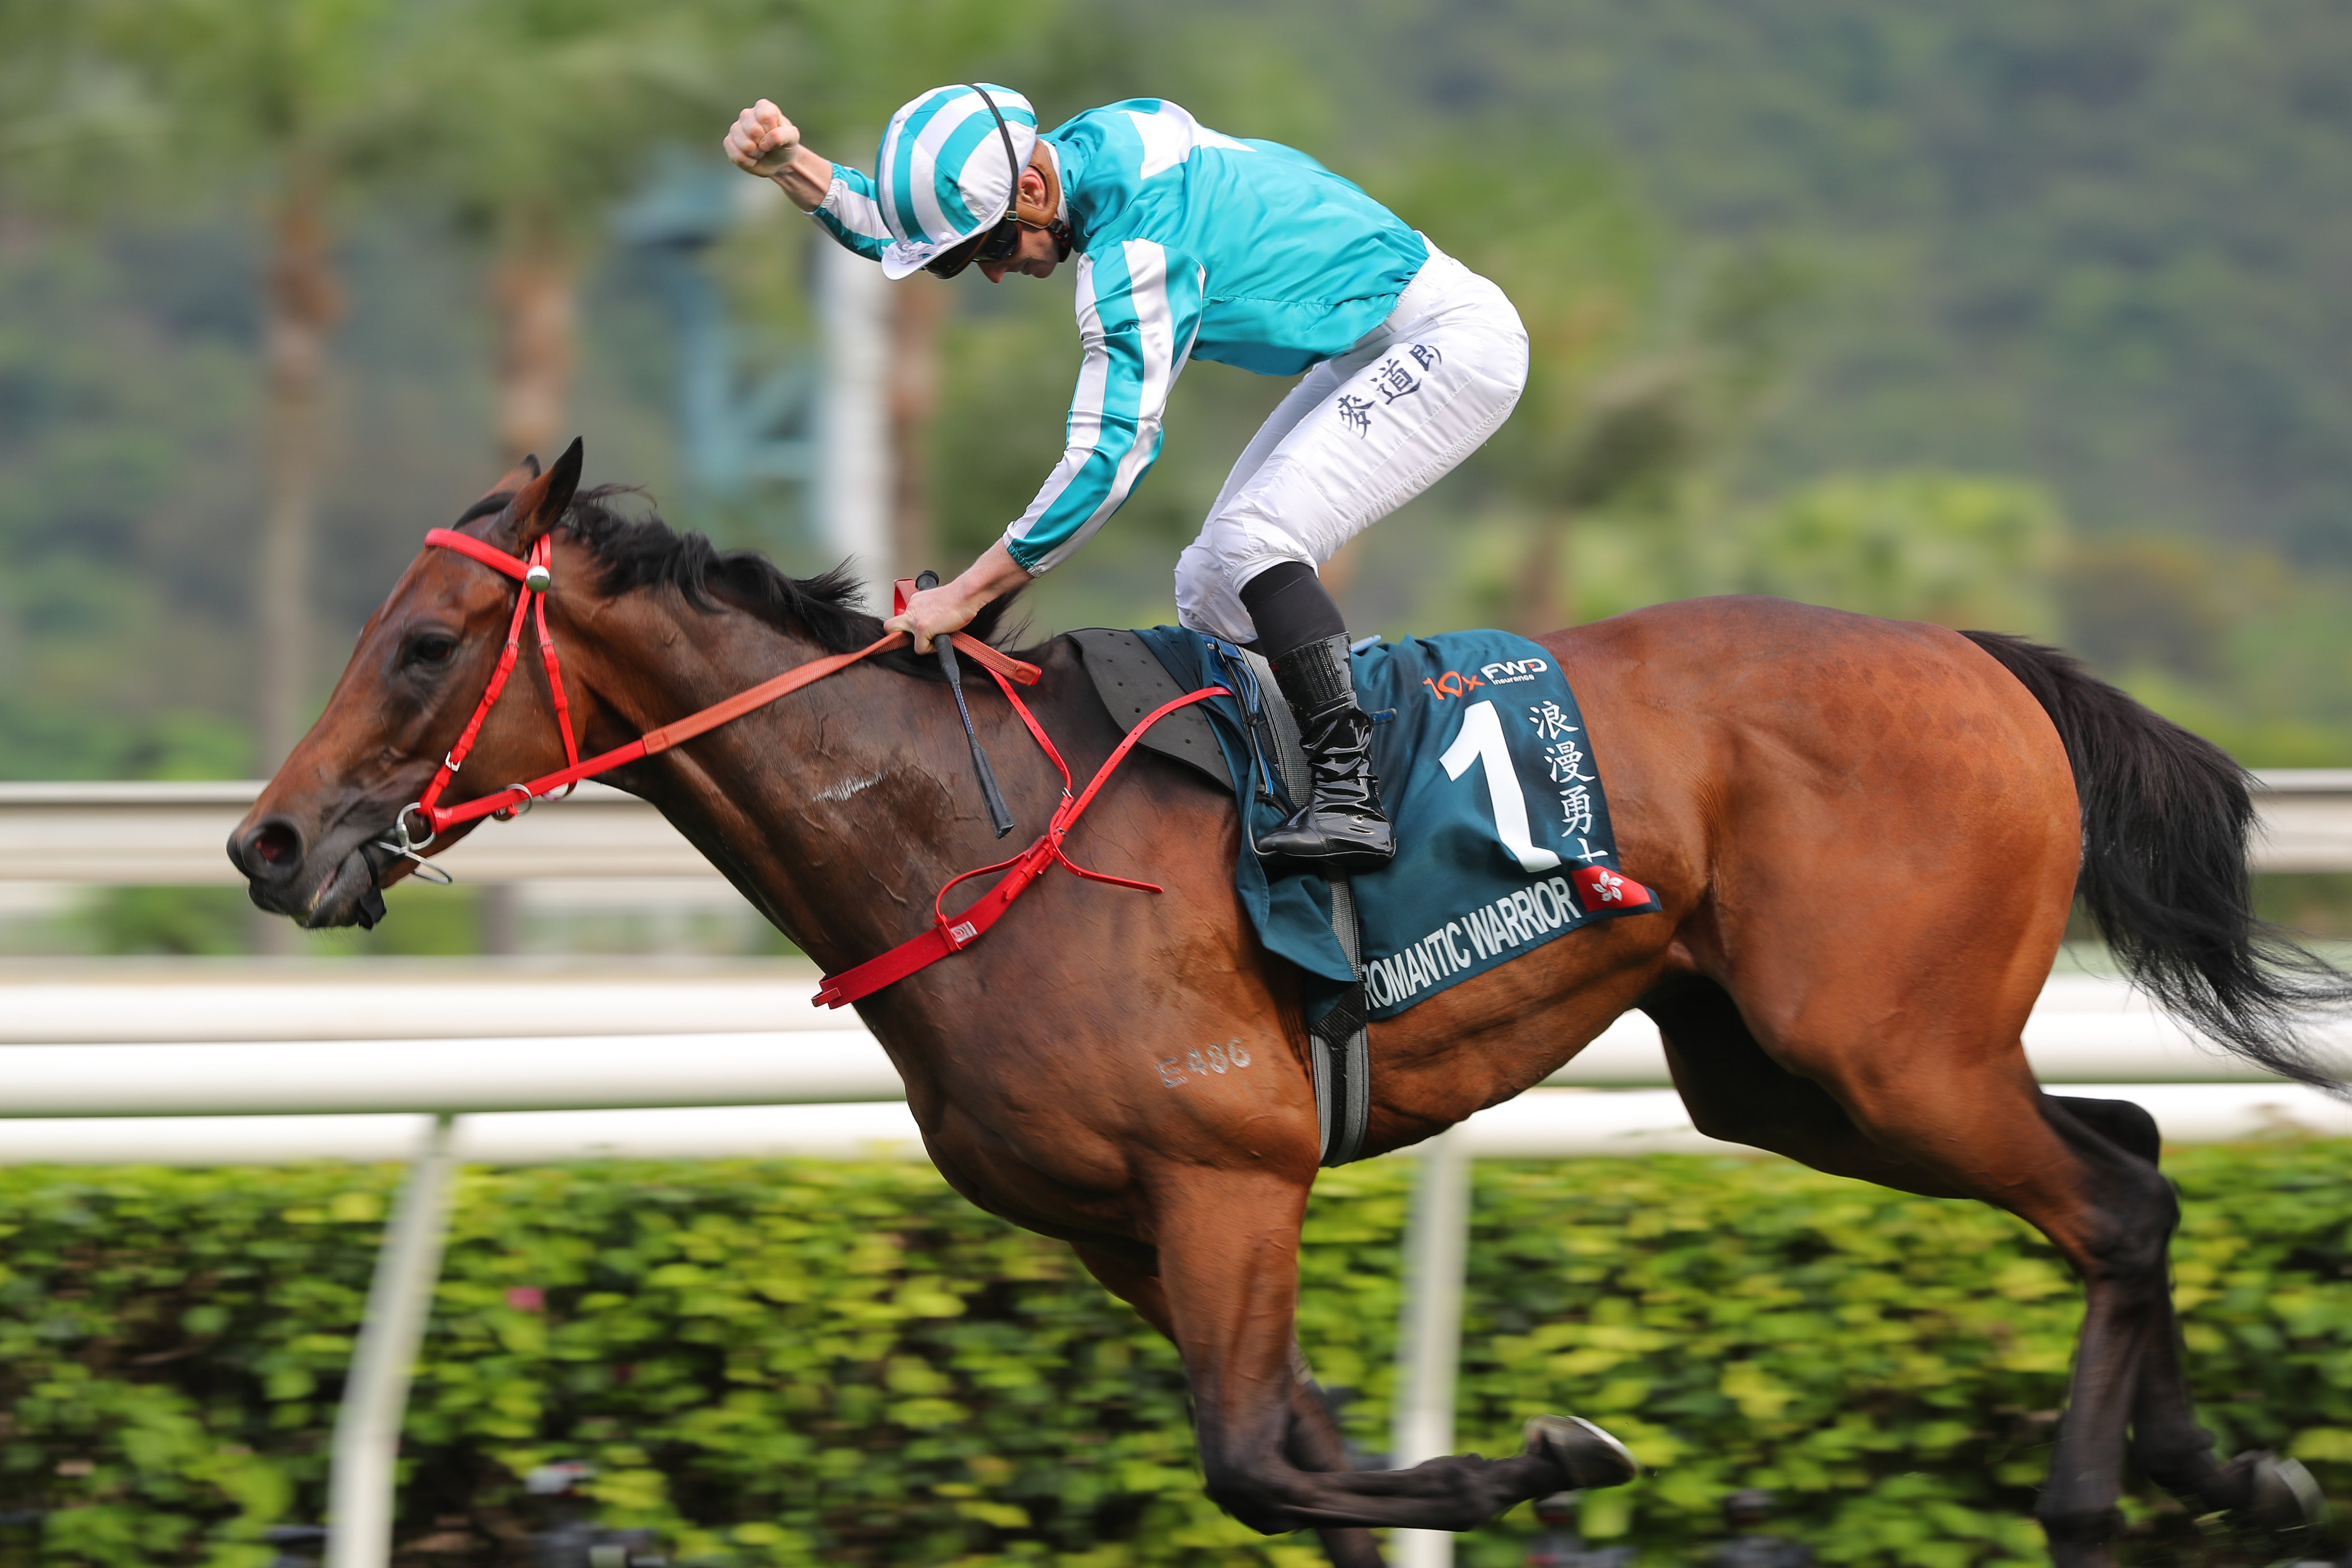 James McDonald clenches his fist in celebration aboard Group One QEII Cup (2,000m) winner Romantic Warrior at Sha Tin on April 30. Photo: Kenneth Chan